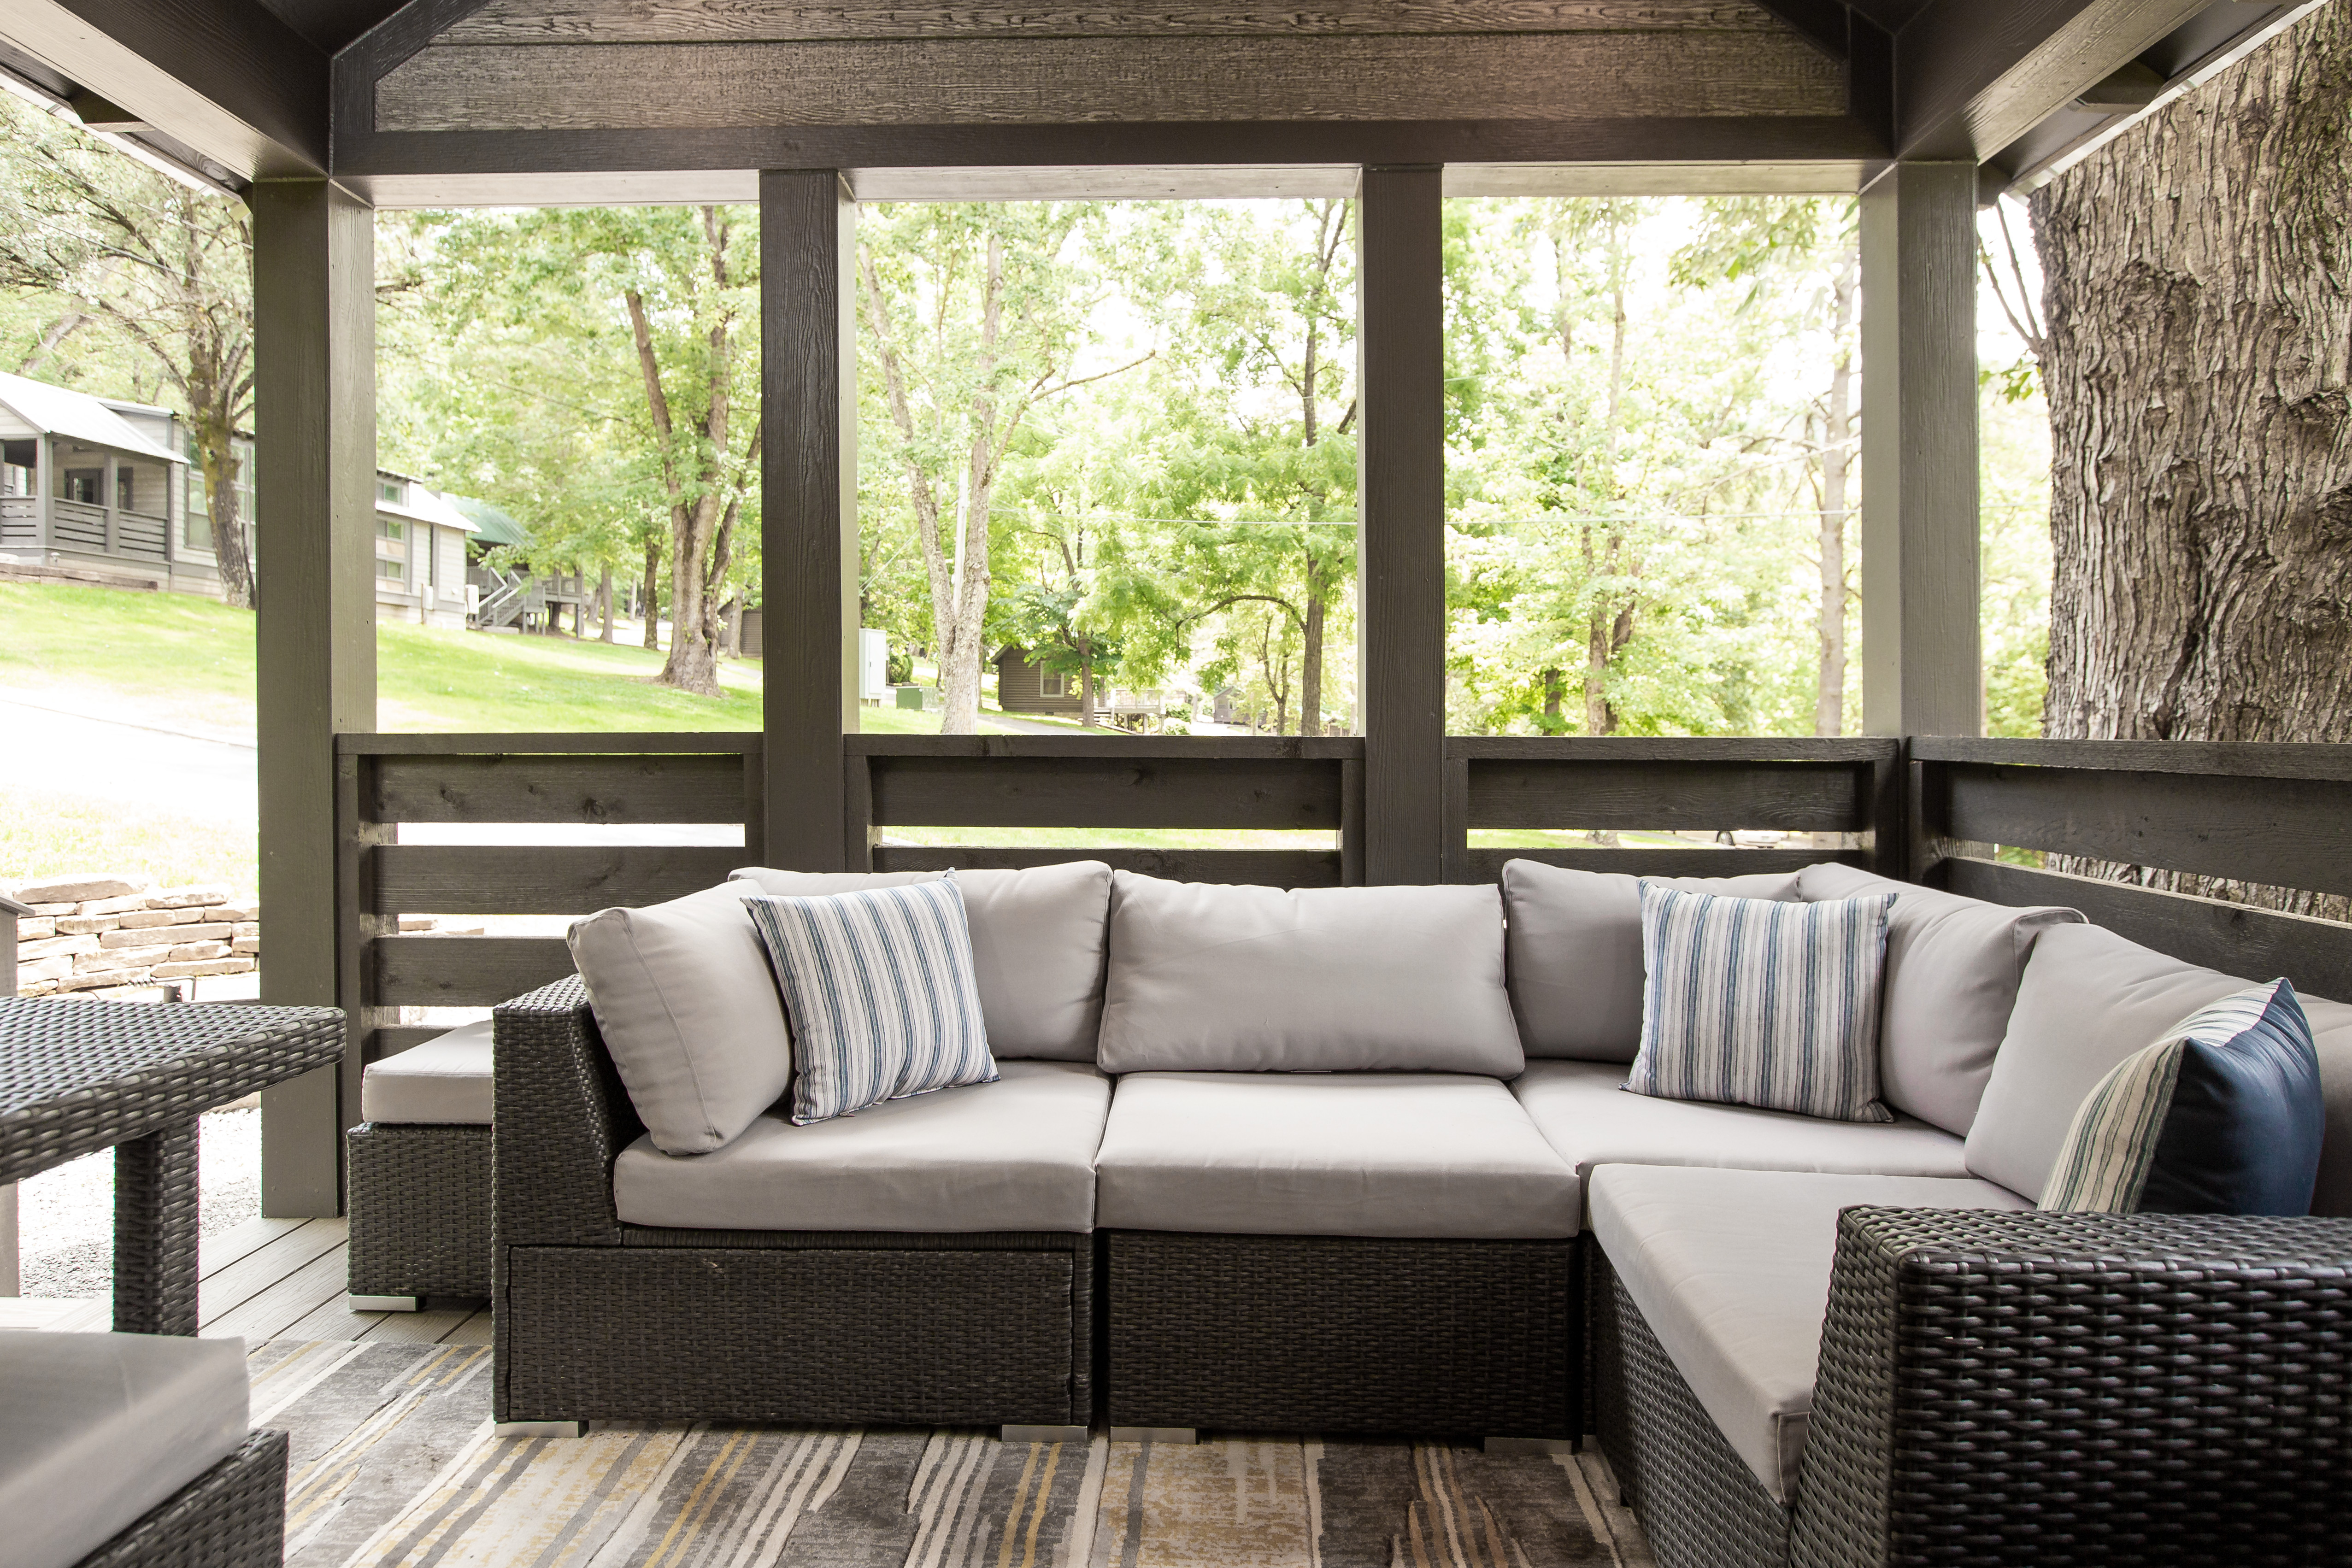 Outdoor couch with gray cushions and striped pillows.